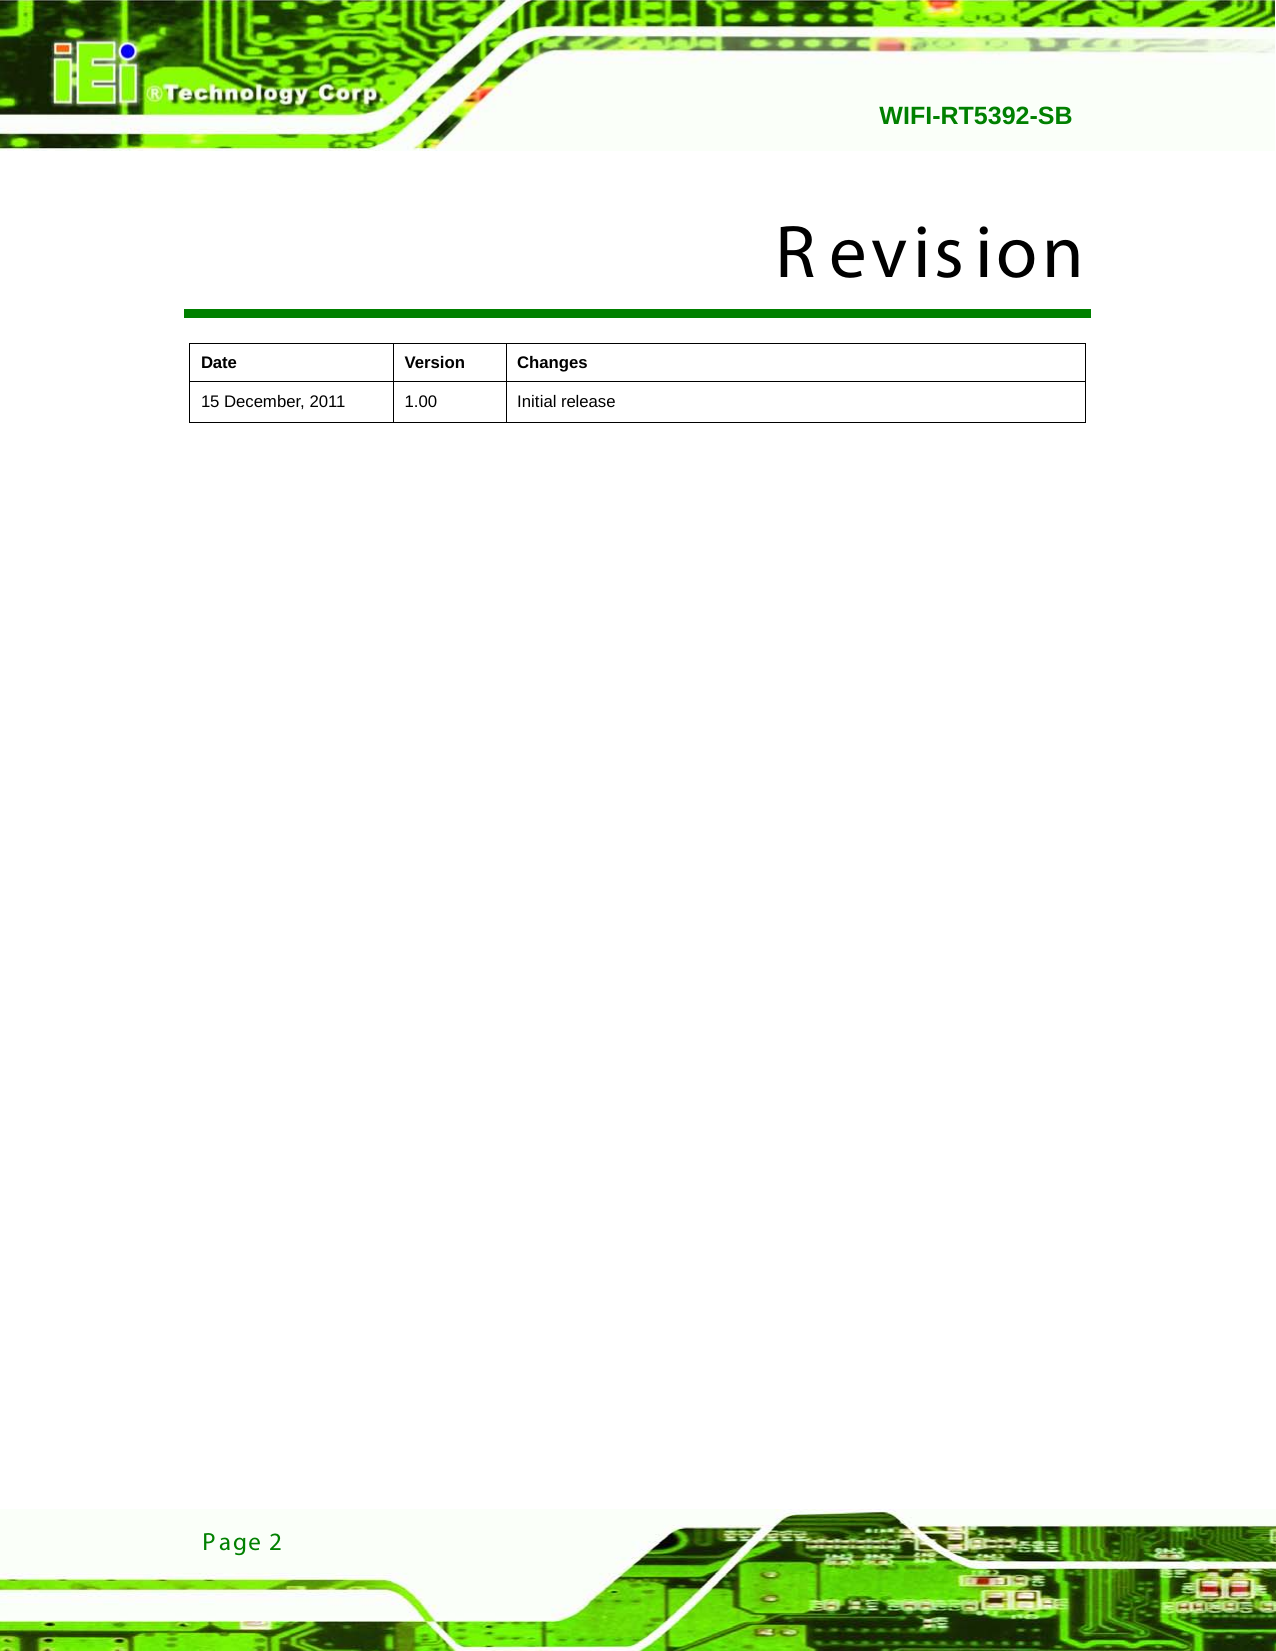   WIFI-RT5392-SB  Page 2 R evis ion   Date Version Changes 15 December, 2011 1.00 Initial release   